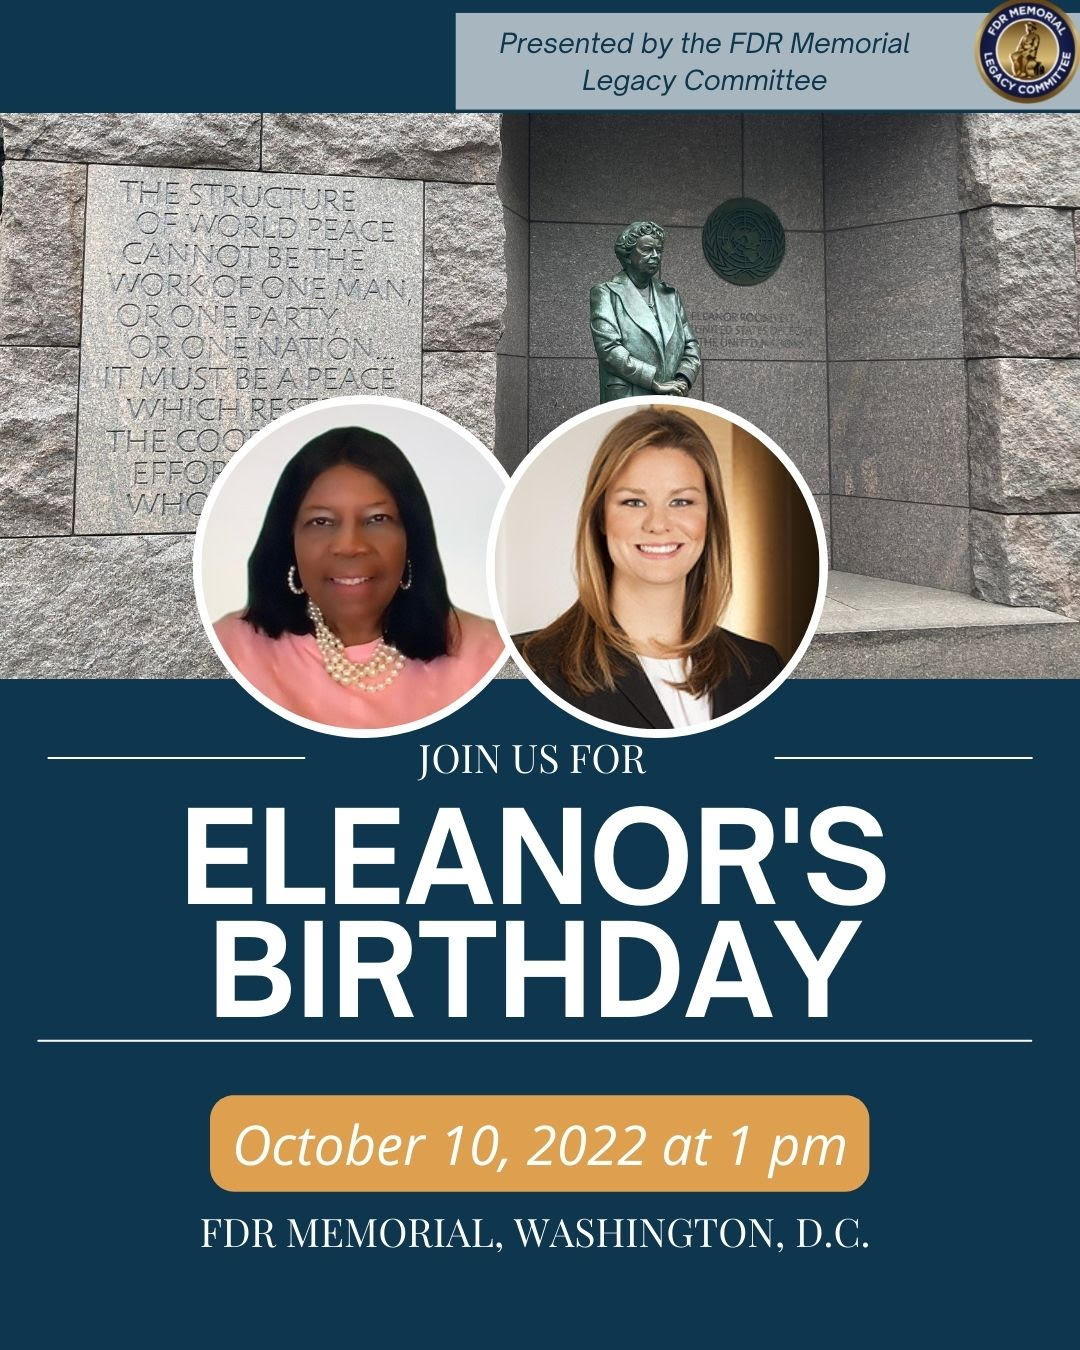 Graphic with photos of Arelene King Berry and Tracy Roosevelt announcing Eleanor's Bday celebration on Oct 10th at FDR Memorial